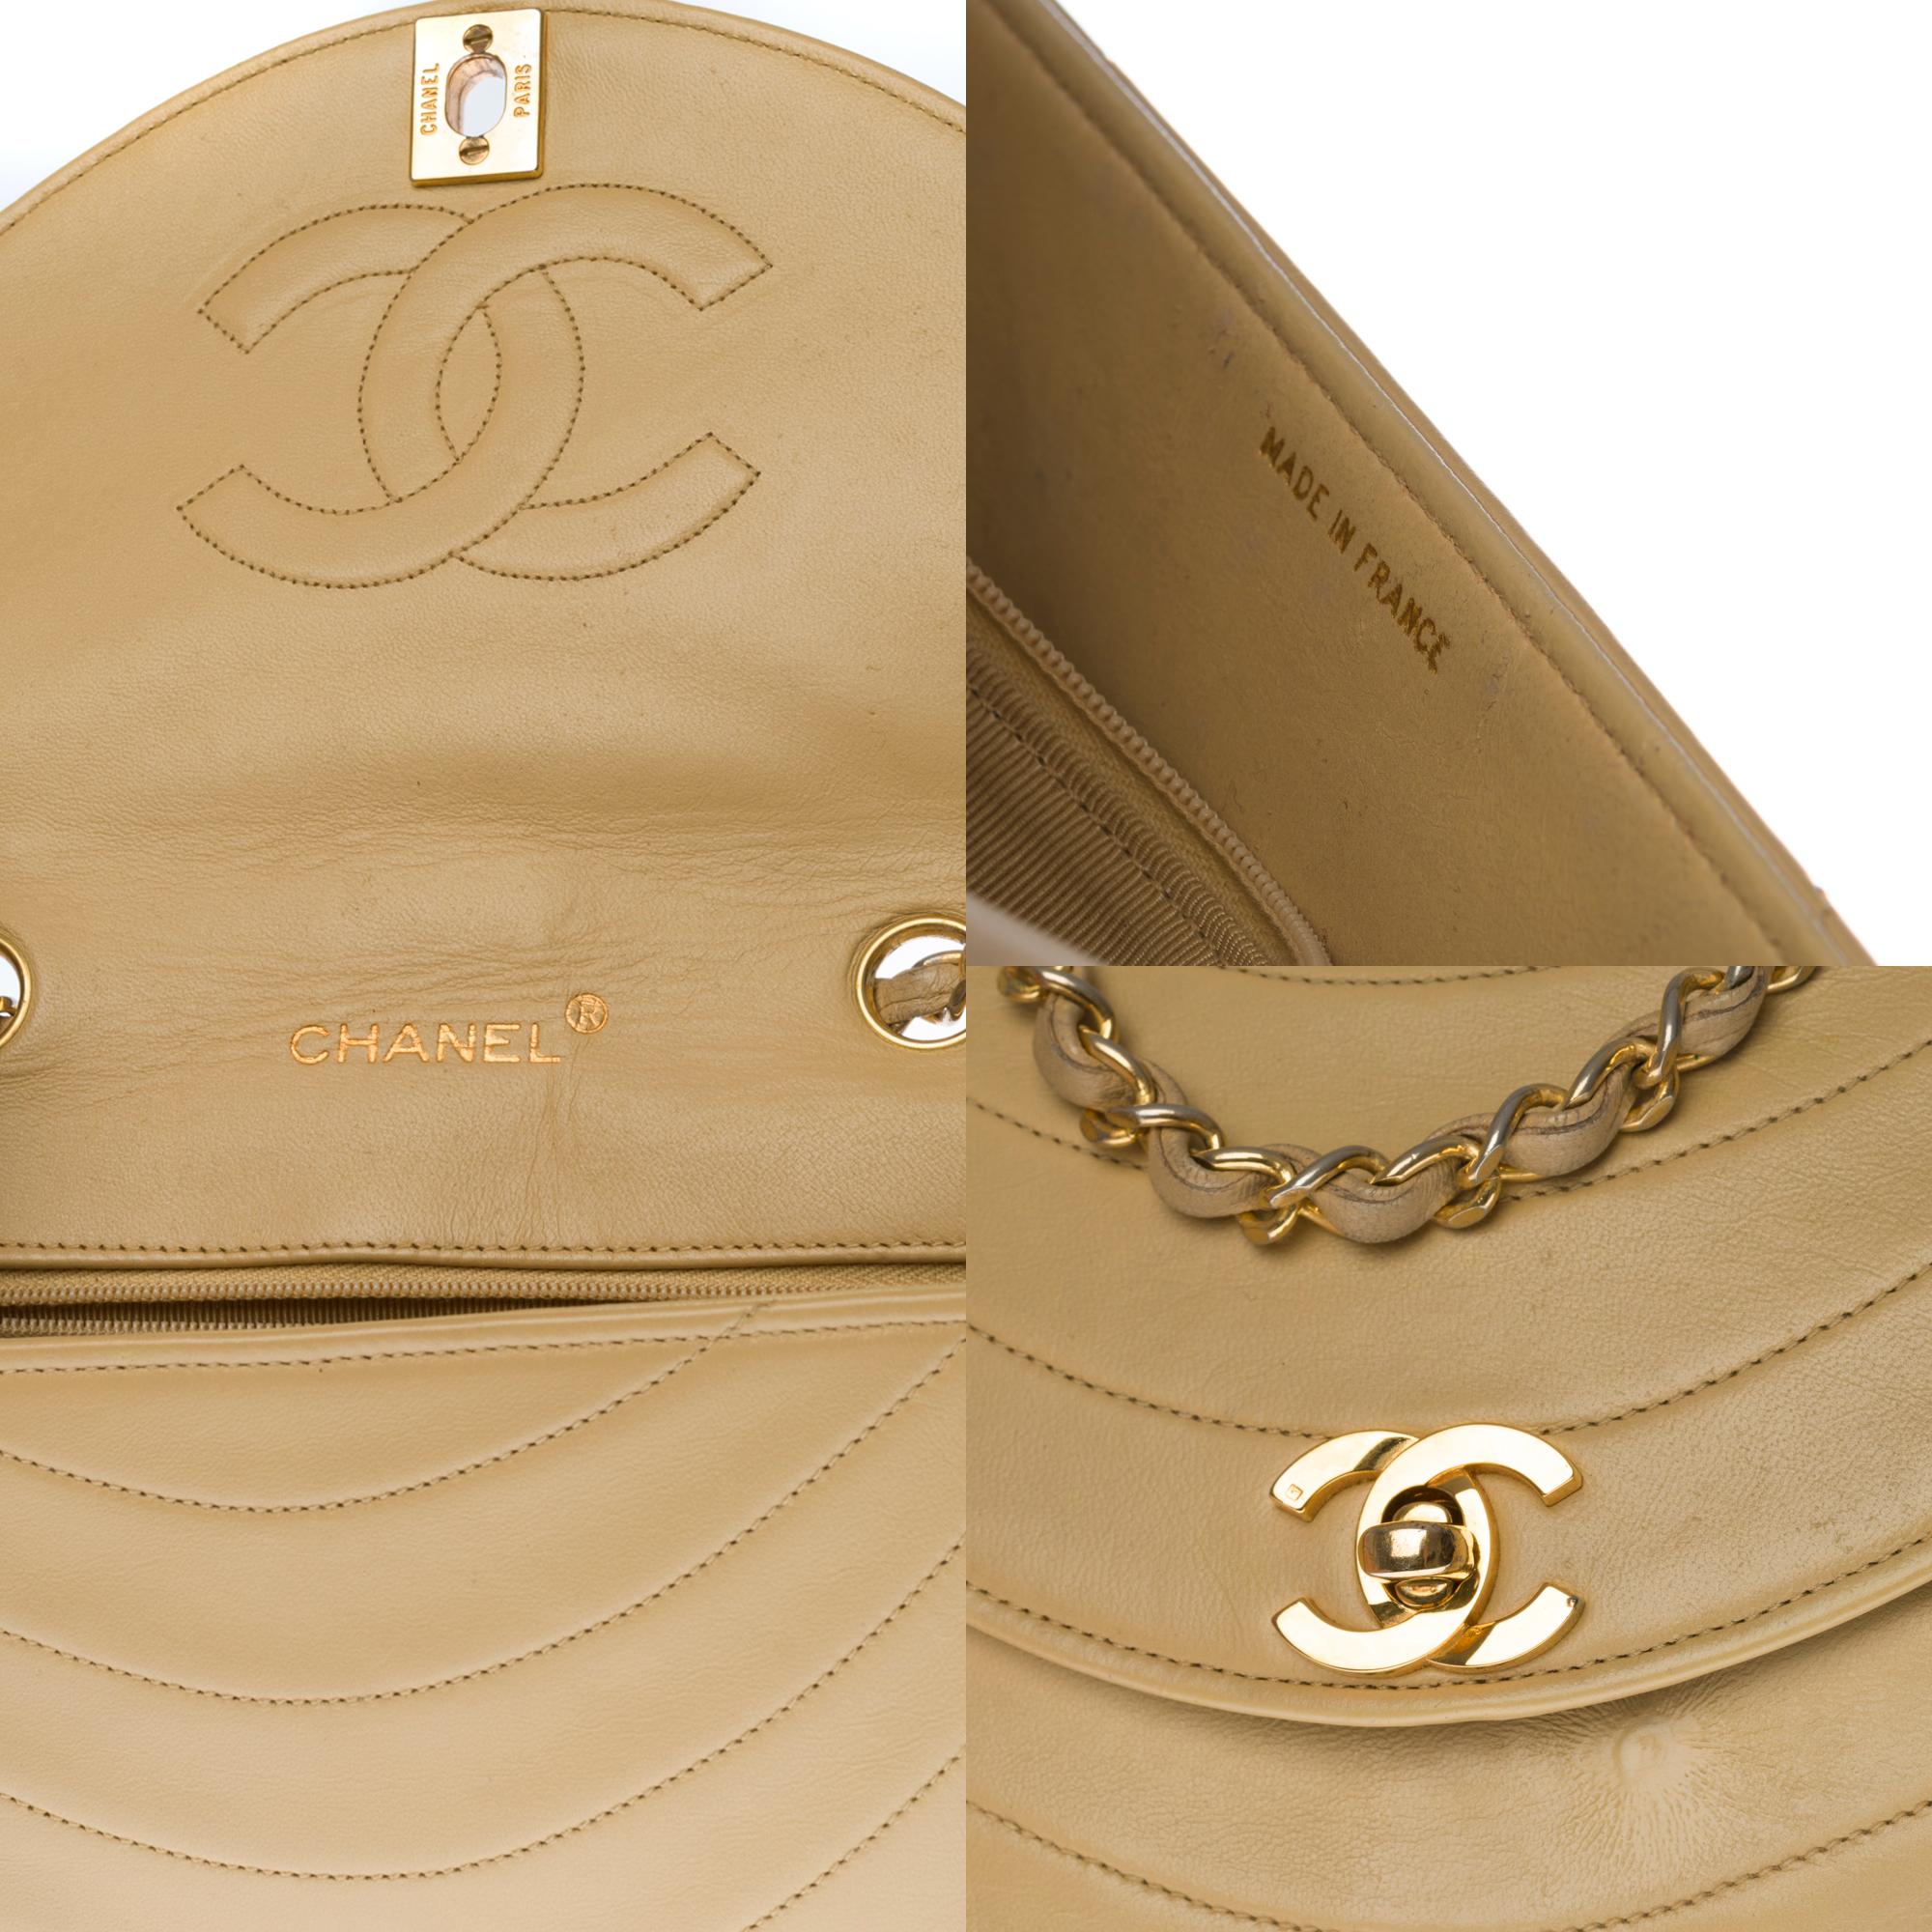 Women's Chanel Classic shoulder bag in beige quilted lambskin and gold hardware